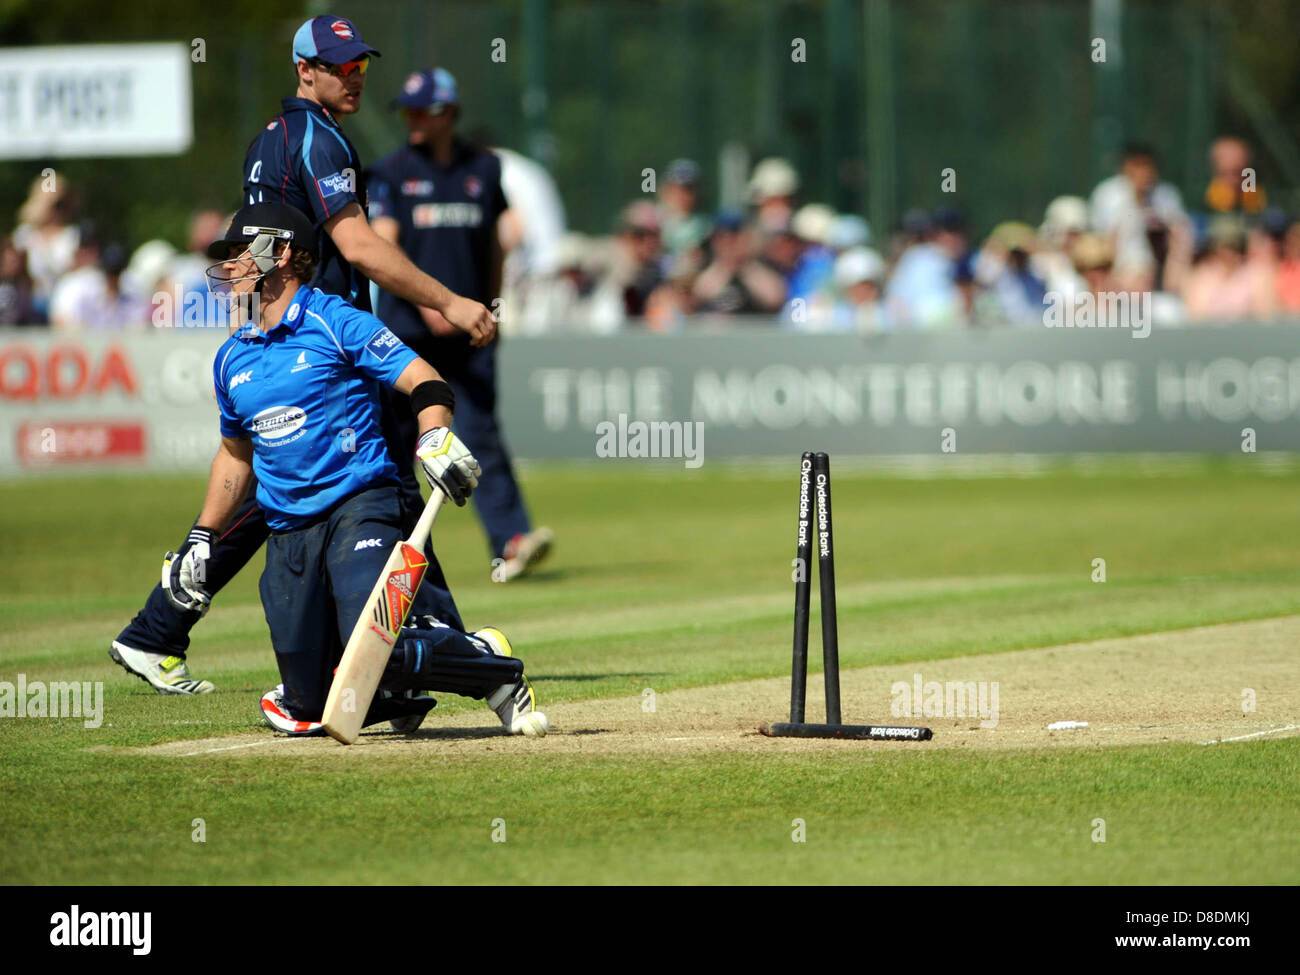 Horsham Sussex UK 26 May 2013 - Sussex batsman Rory Hamilton-Brown is run out as Sussex Sharks take on Kent Spitfires in their YB40 match at Horsham today Photograph taken by Simon Dack/Alamy Live News Stock Photo